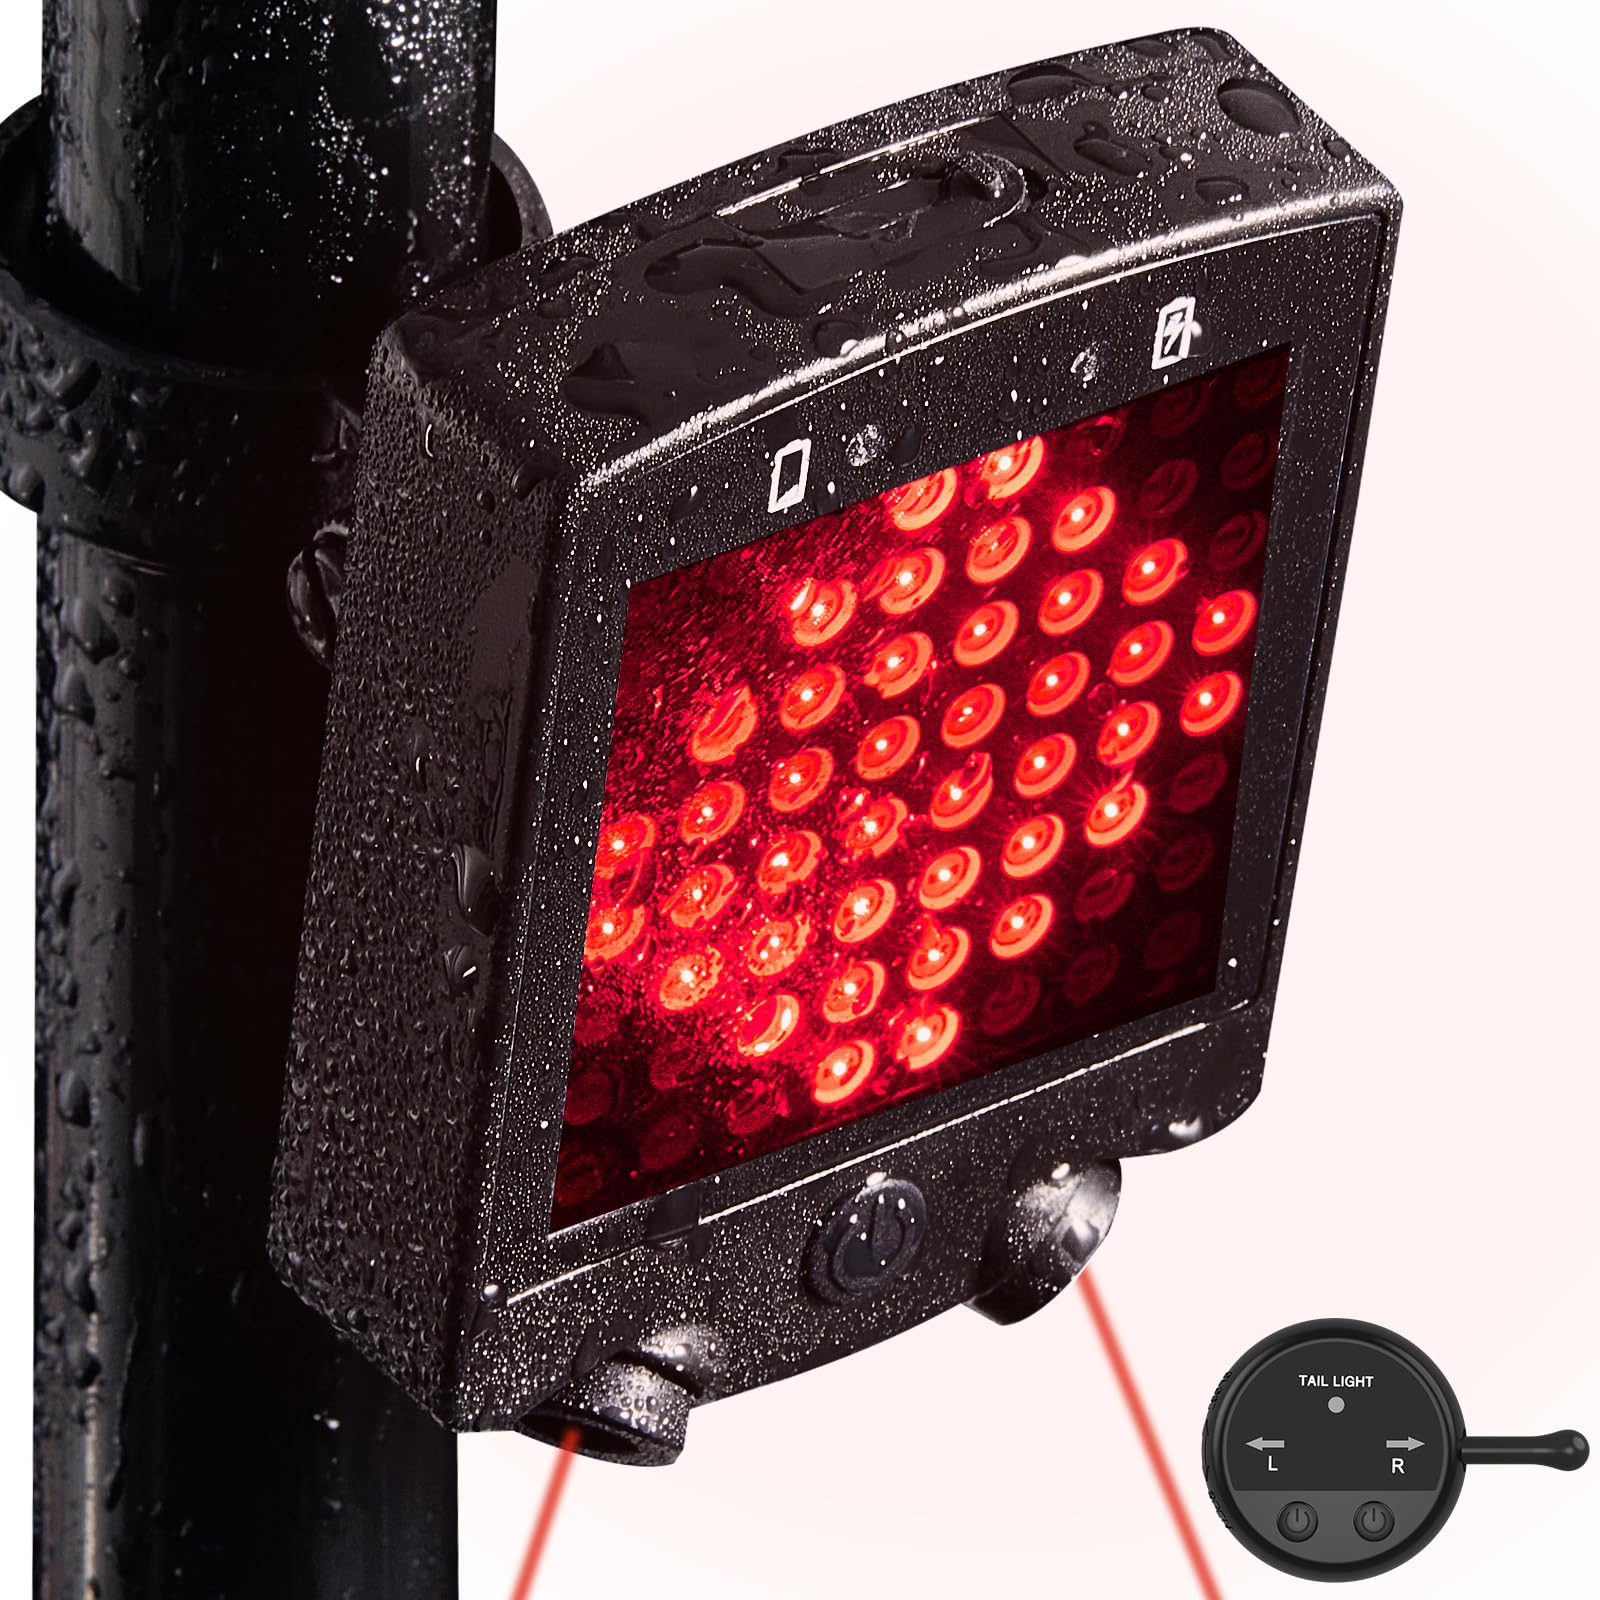 $11.99 Zacro Bike Tail Light with Turn Signals, Laser Drive LED Bike Rear Light with Remote Control,r USB Rechargeable, [Upgrade 8 Flashing Modes]